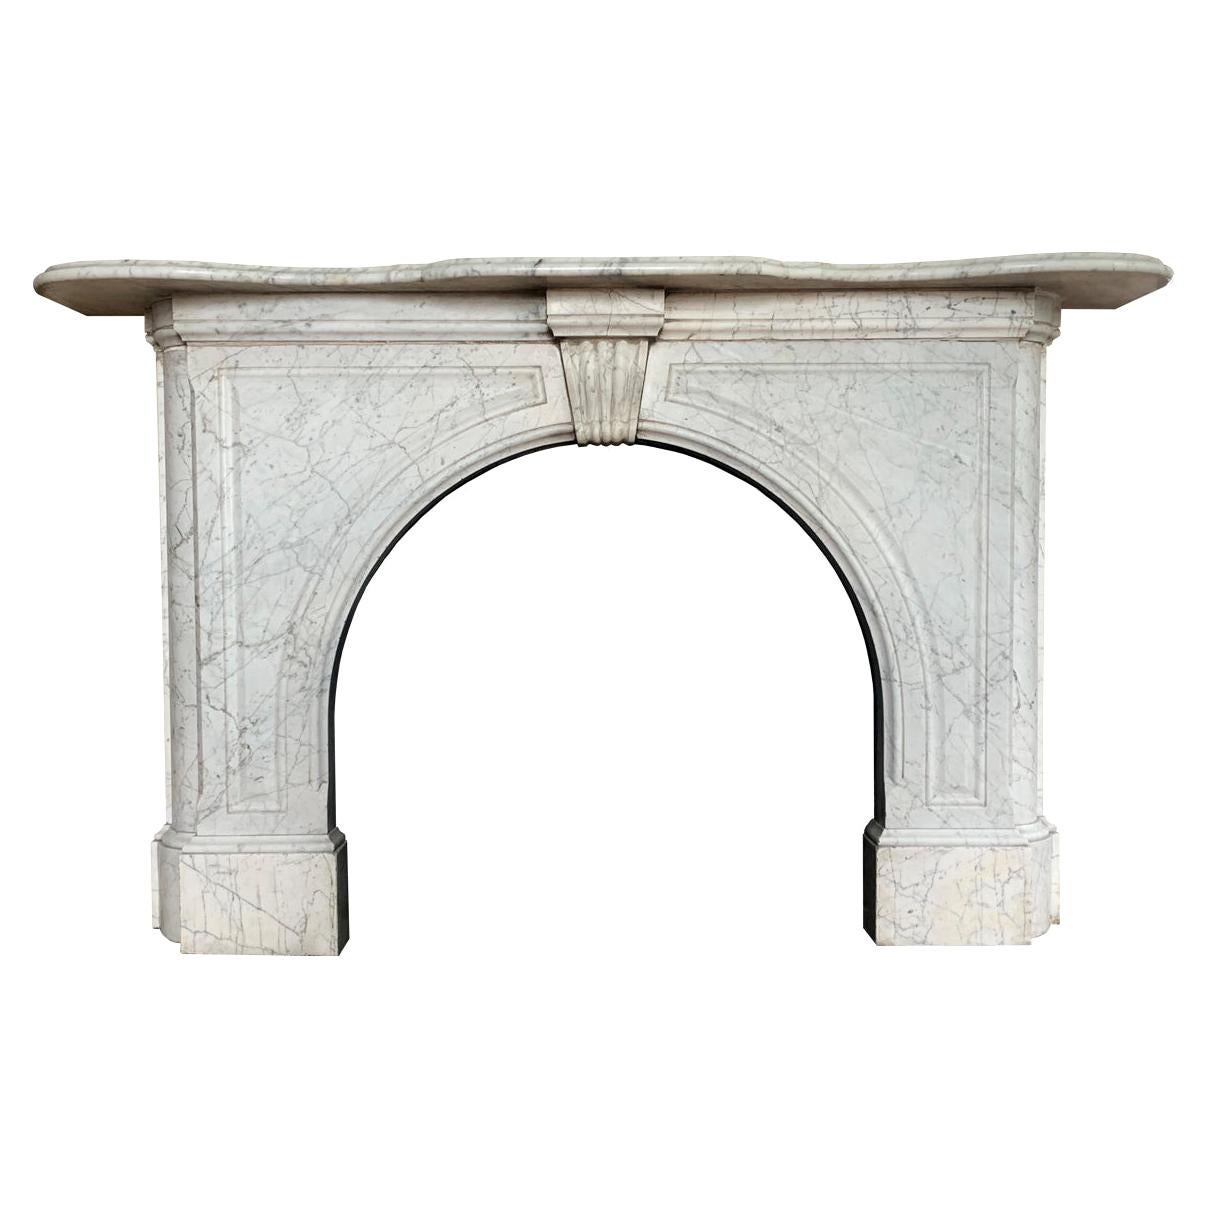 Large 19th Century Mid-Victorian Arched Carrara Marble Fireplace Surround For Sale